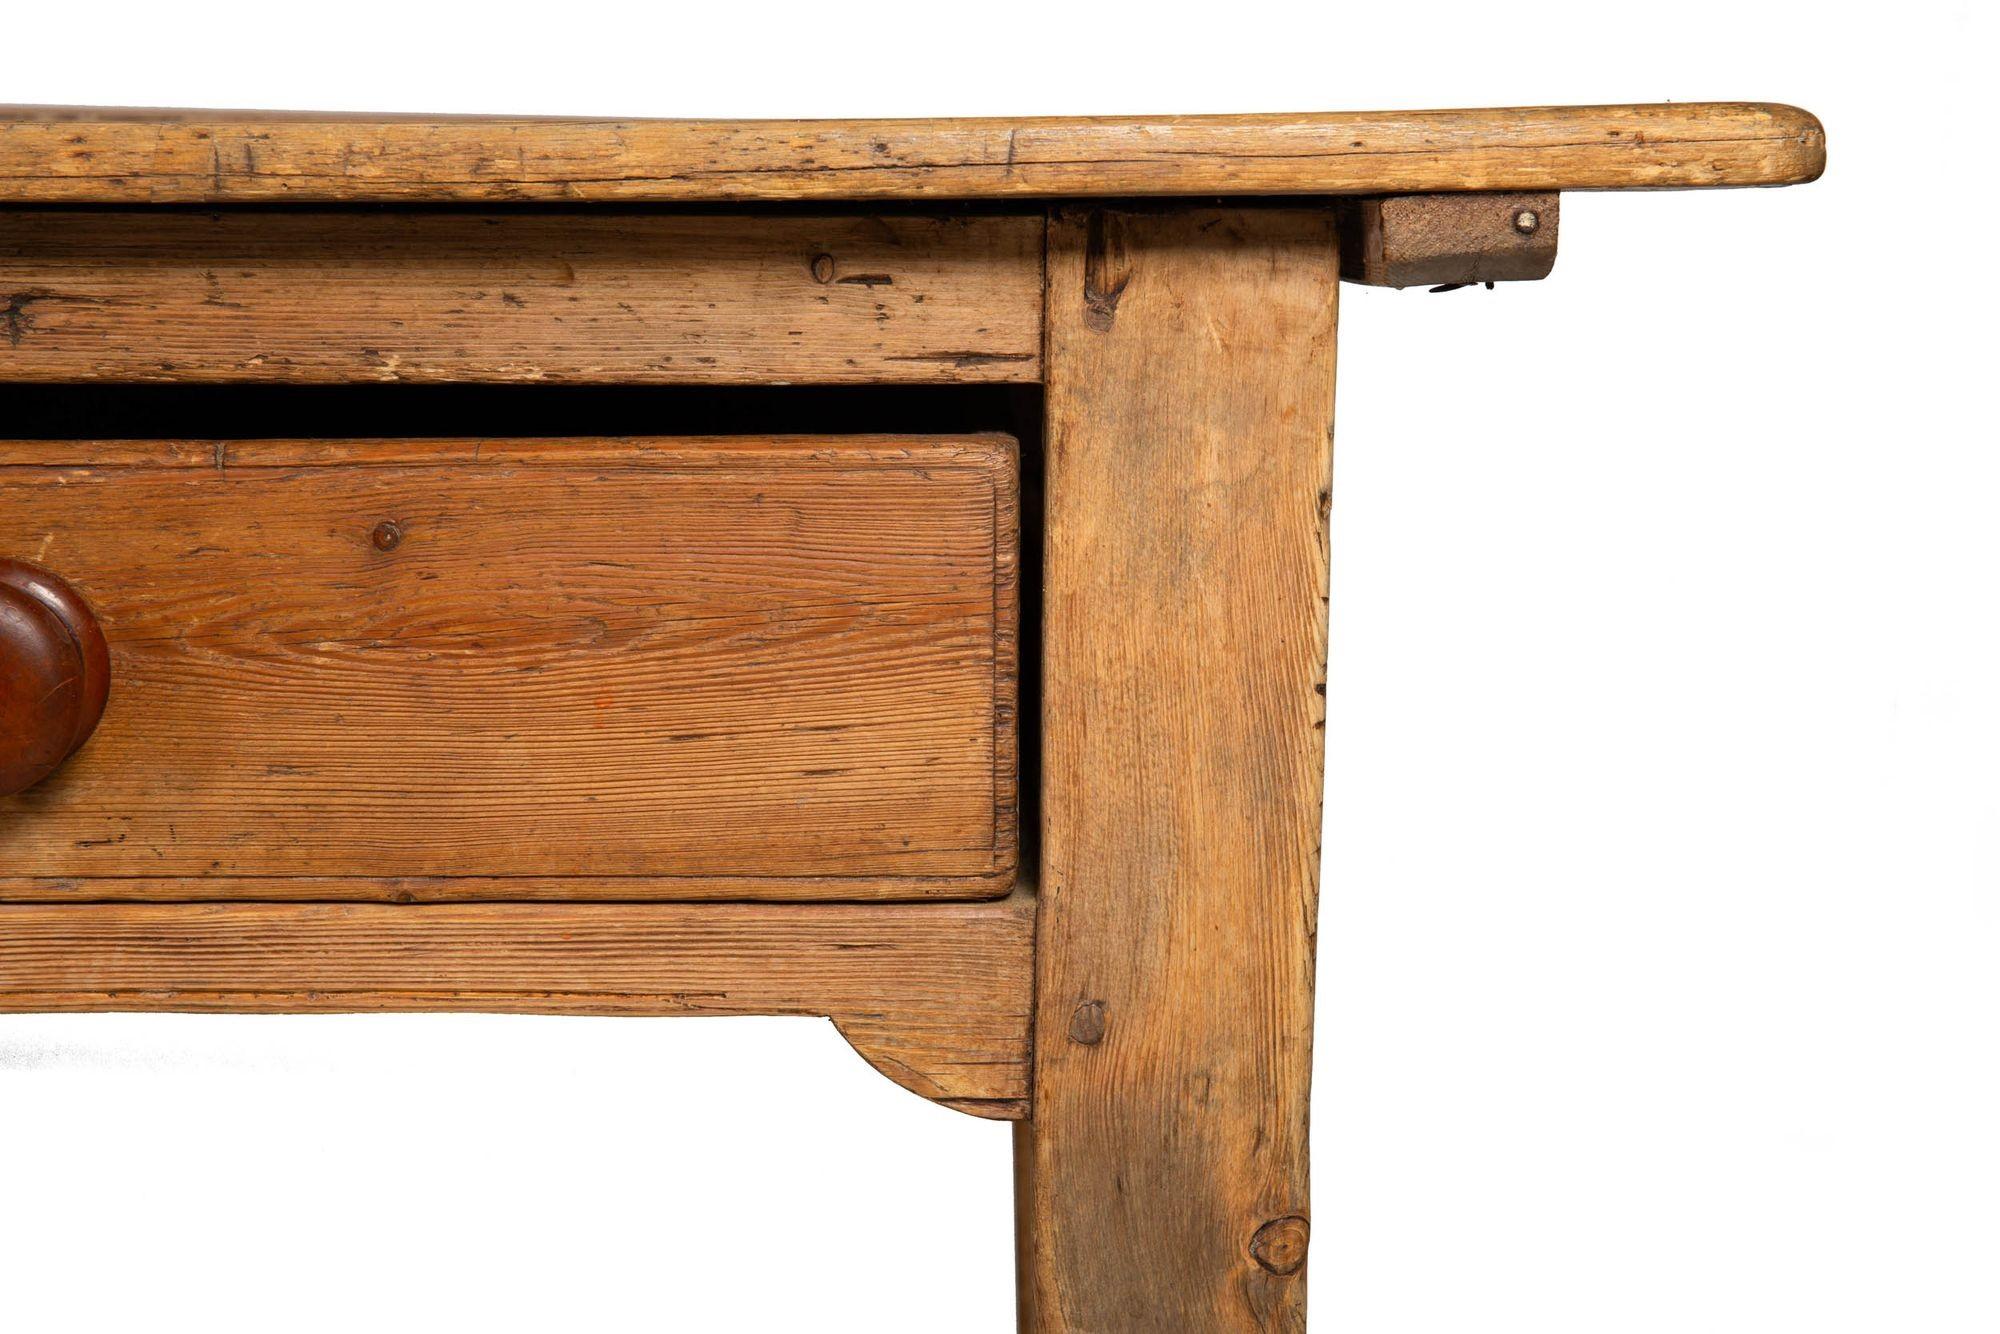 Worn and Patinated English Antique Pine Tavern Table Desk For Sale 13